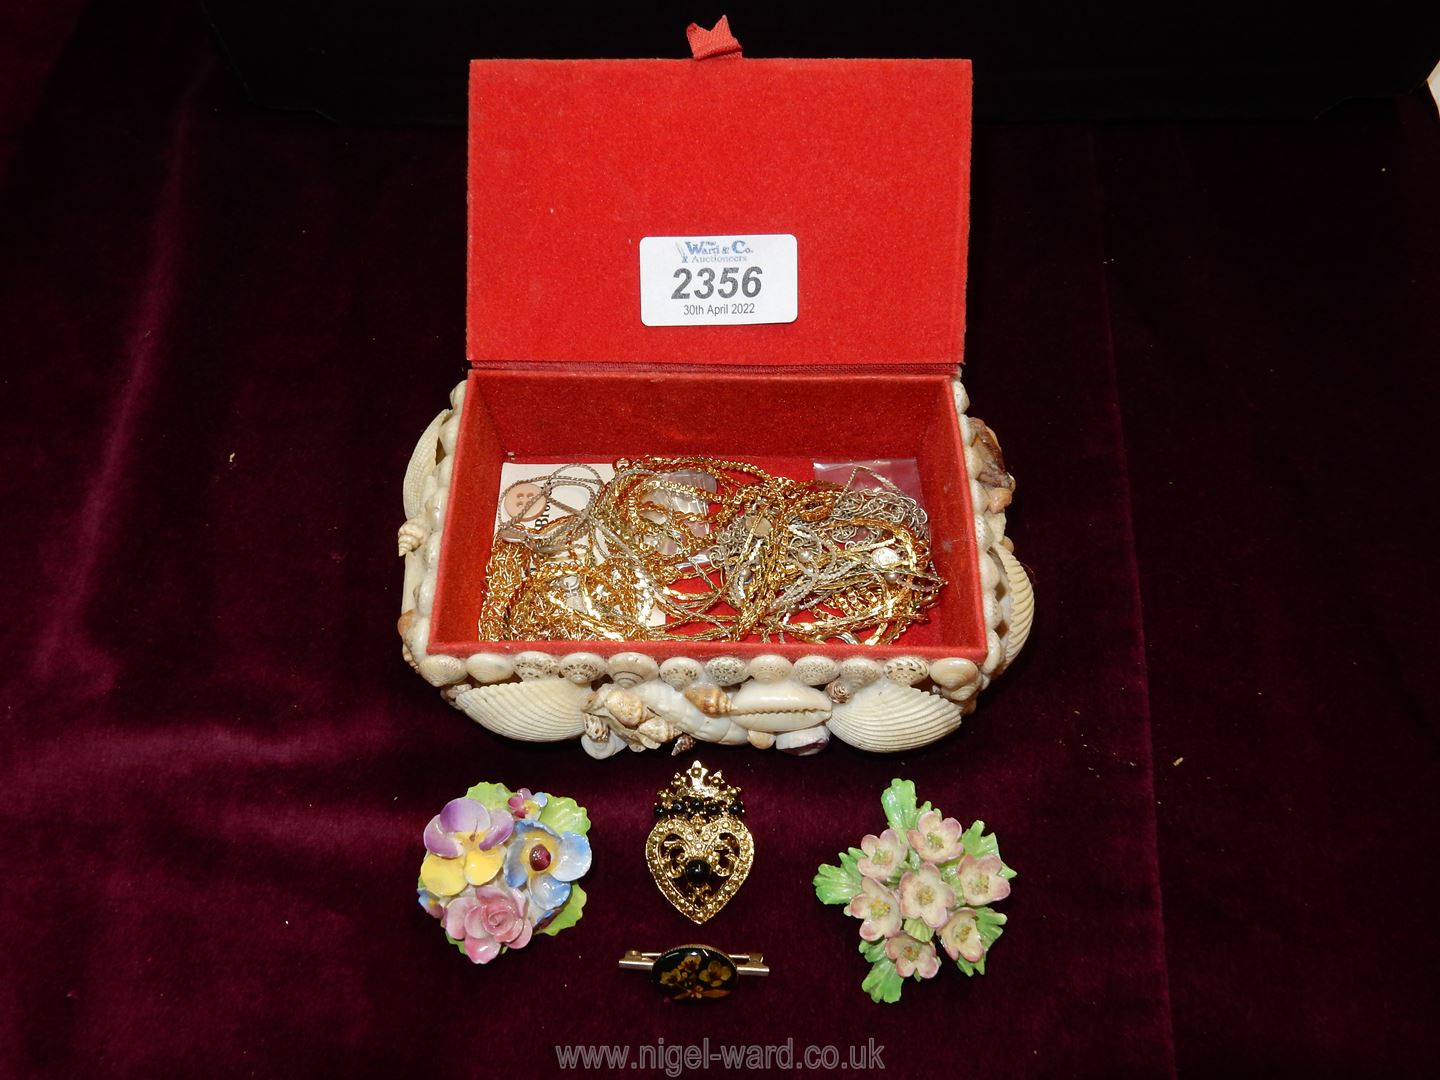 A shell encrusted jewellery box and contents of chains, floral brooches, bracelets etc.